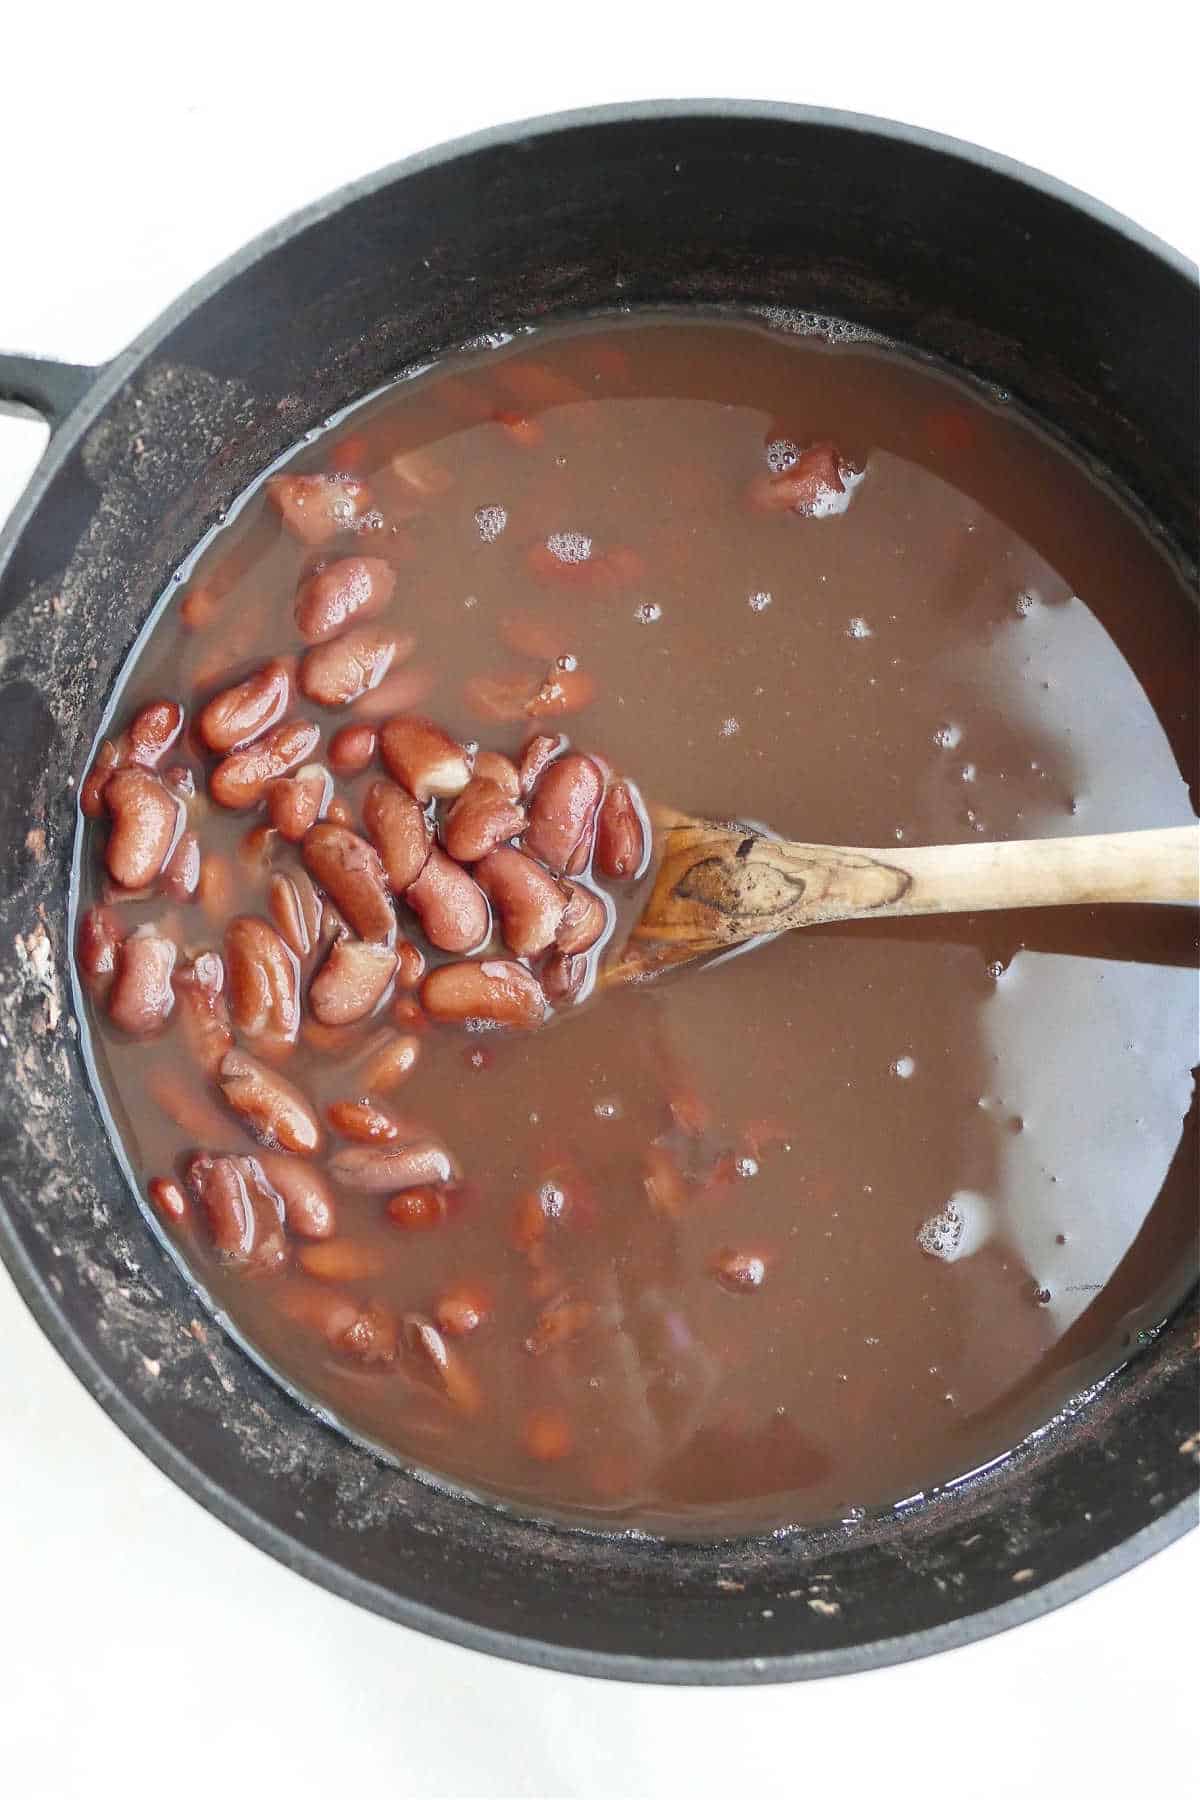 cooked kidney beans on a counter next to spoon and napkin